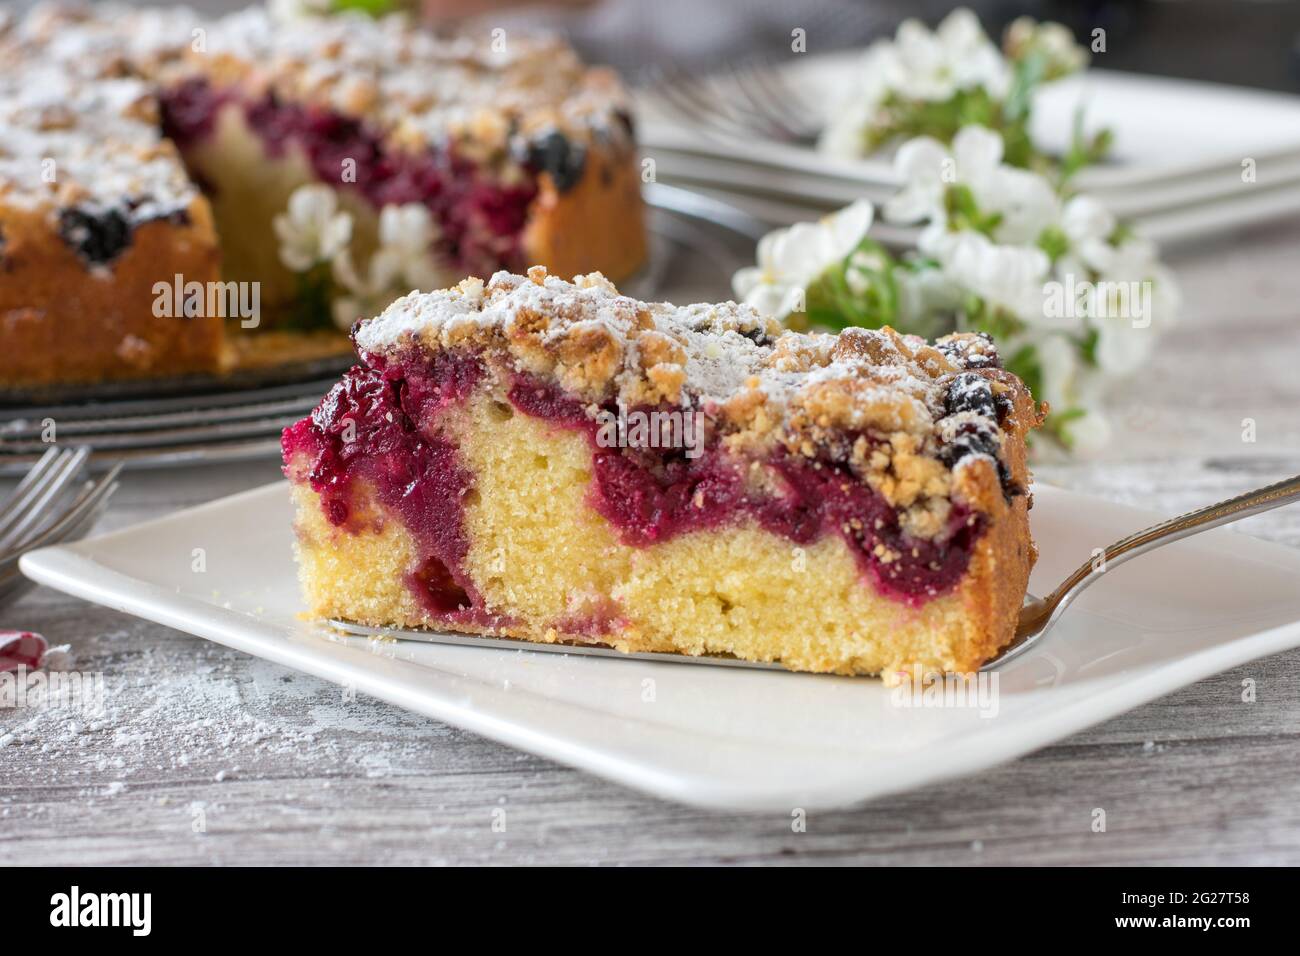 A piece of rustic cherry cake with crumbles served on a plate. Closeup view with whole cake in the background. Stock Photo